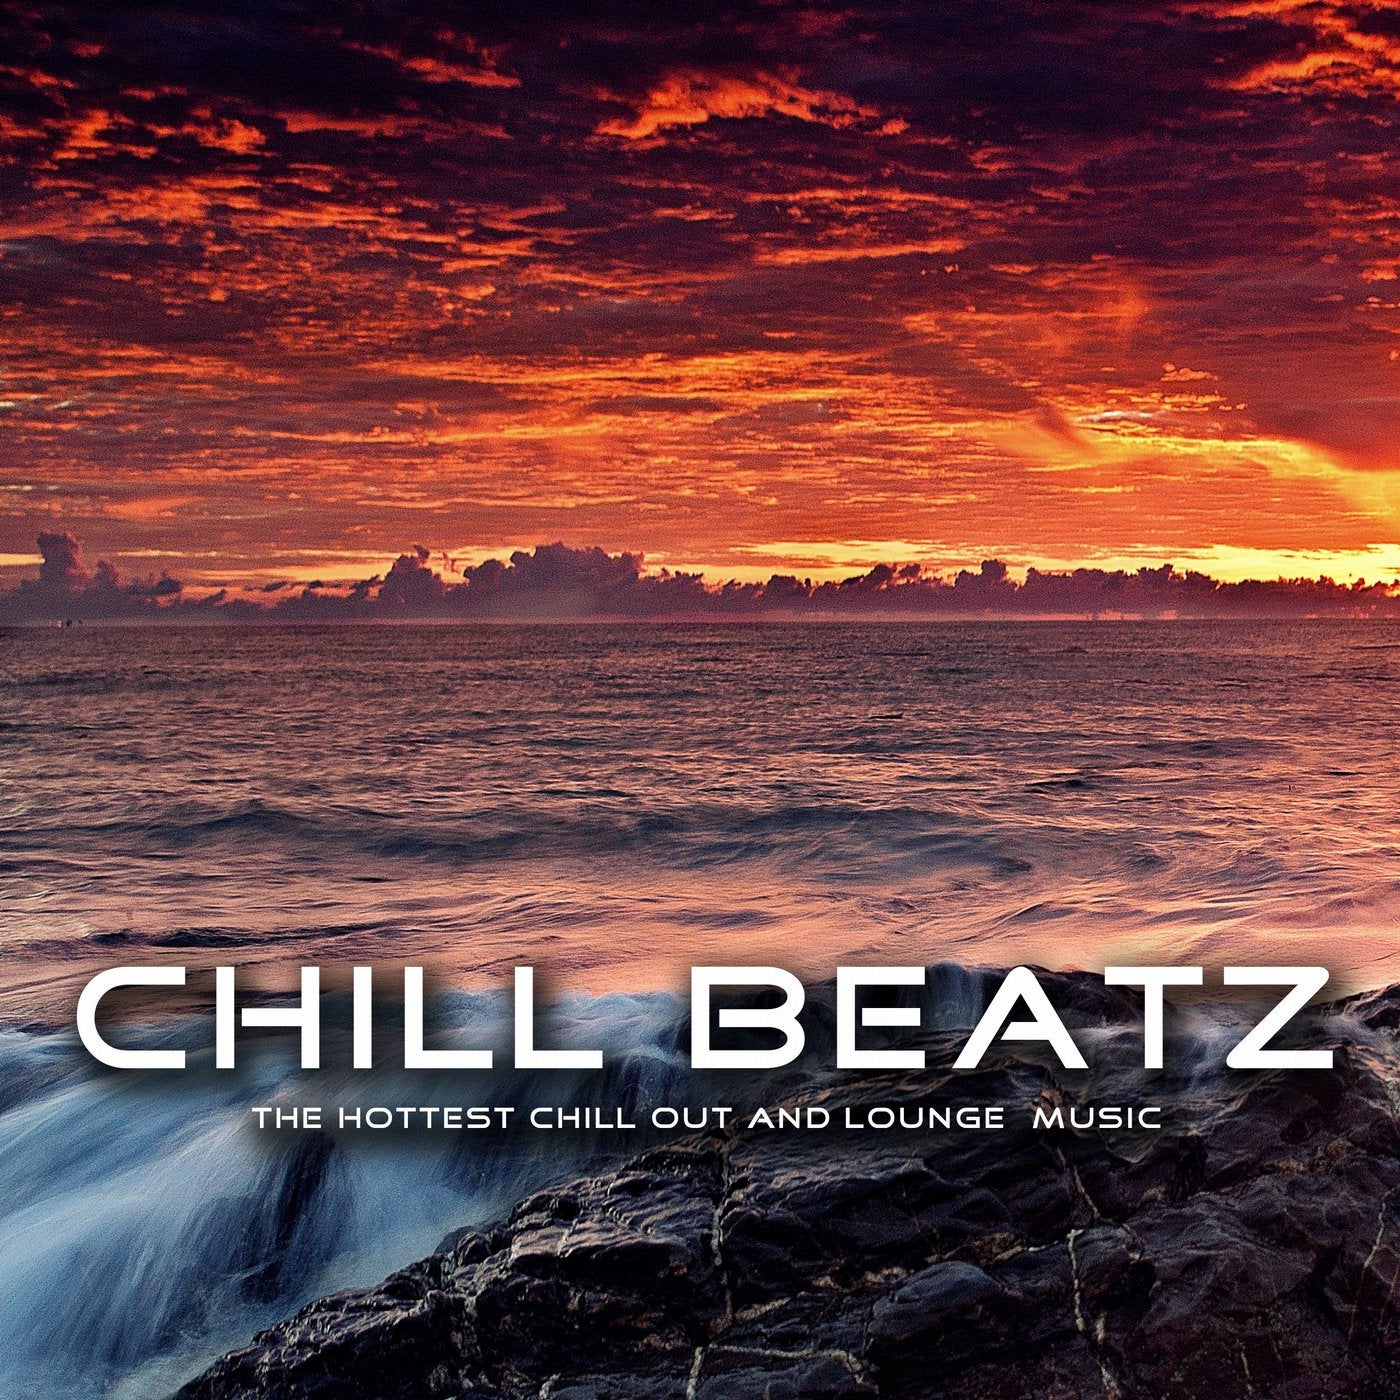 Chill Beatz (The Hottest Chill Out and Lounge Music)